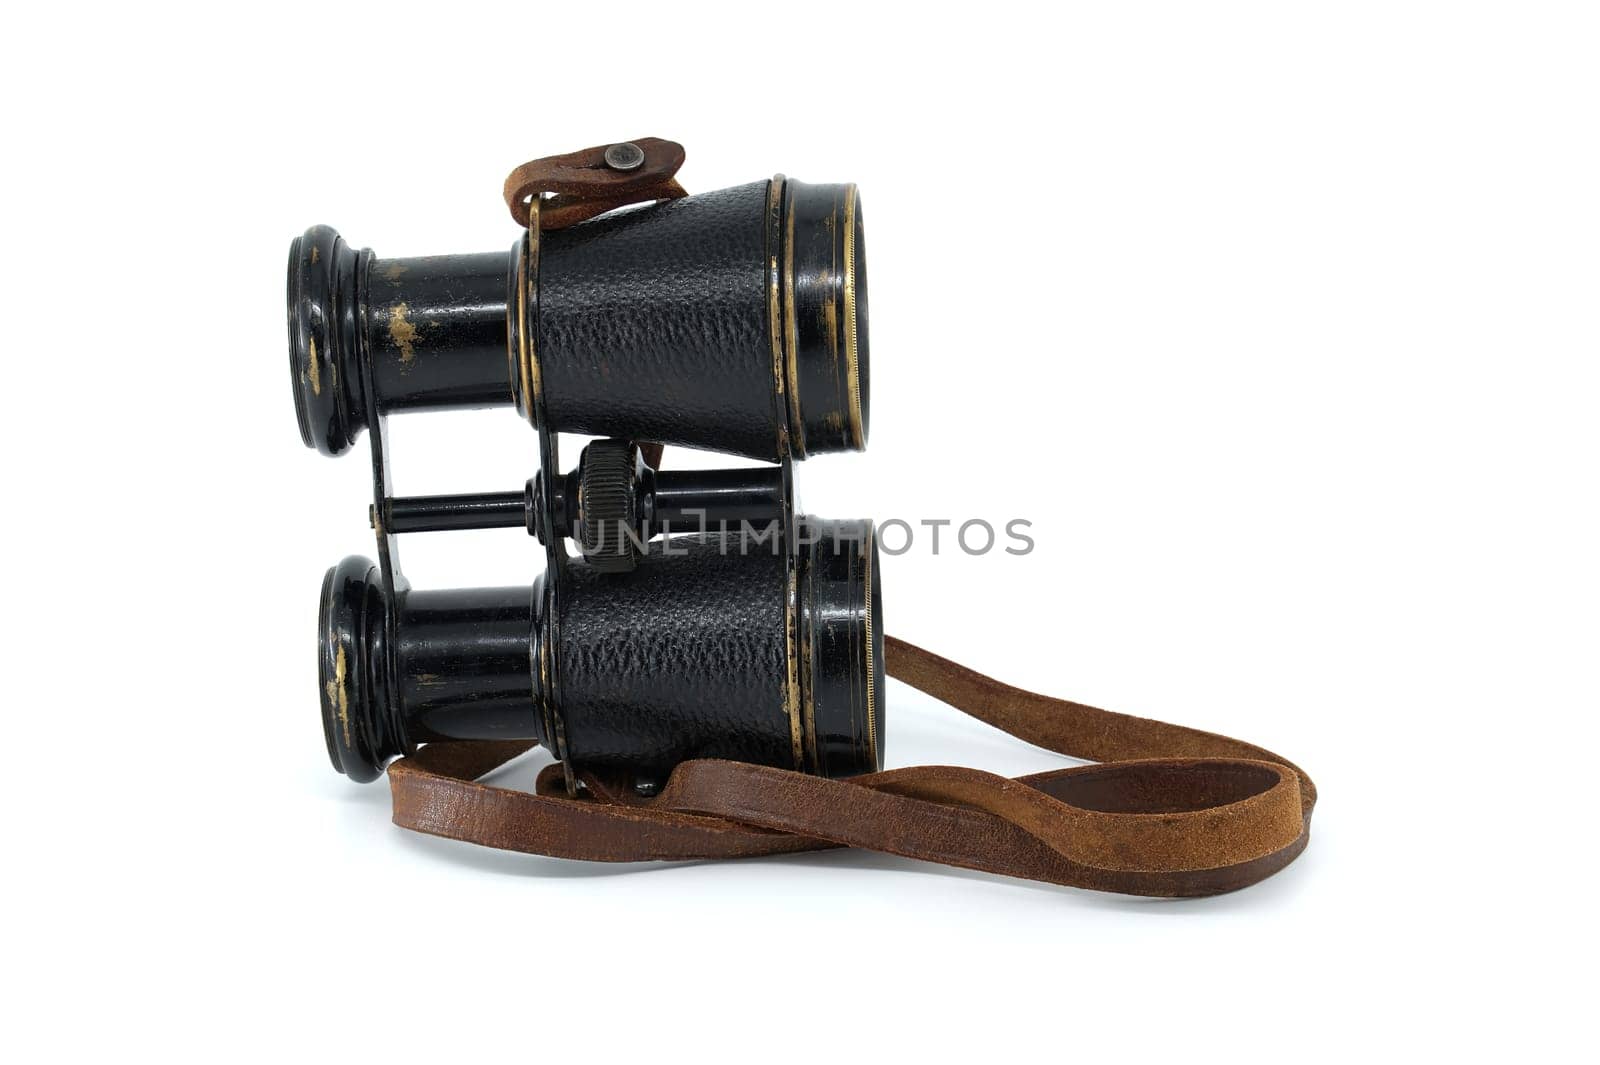 Binoculars with brown leather straps isolated on white by NetPix